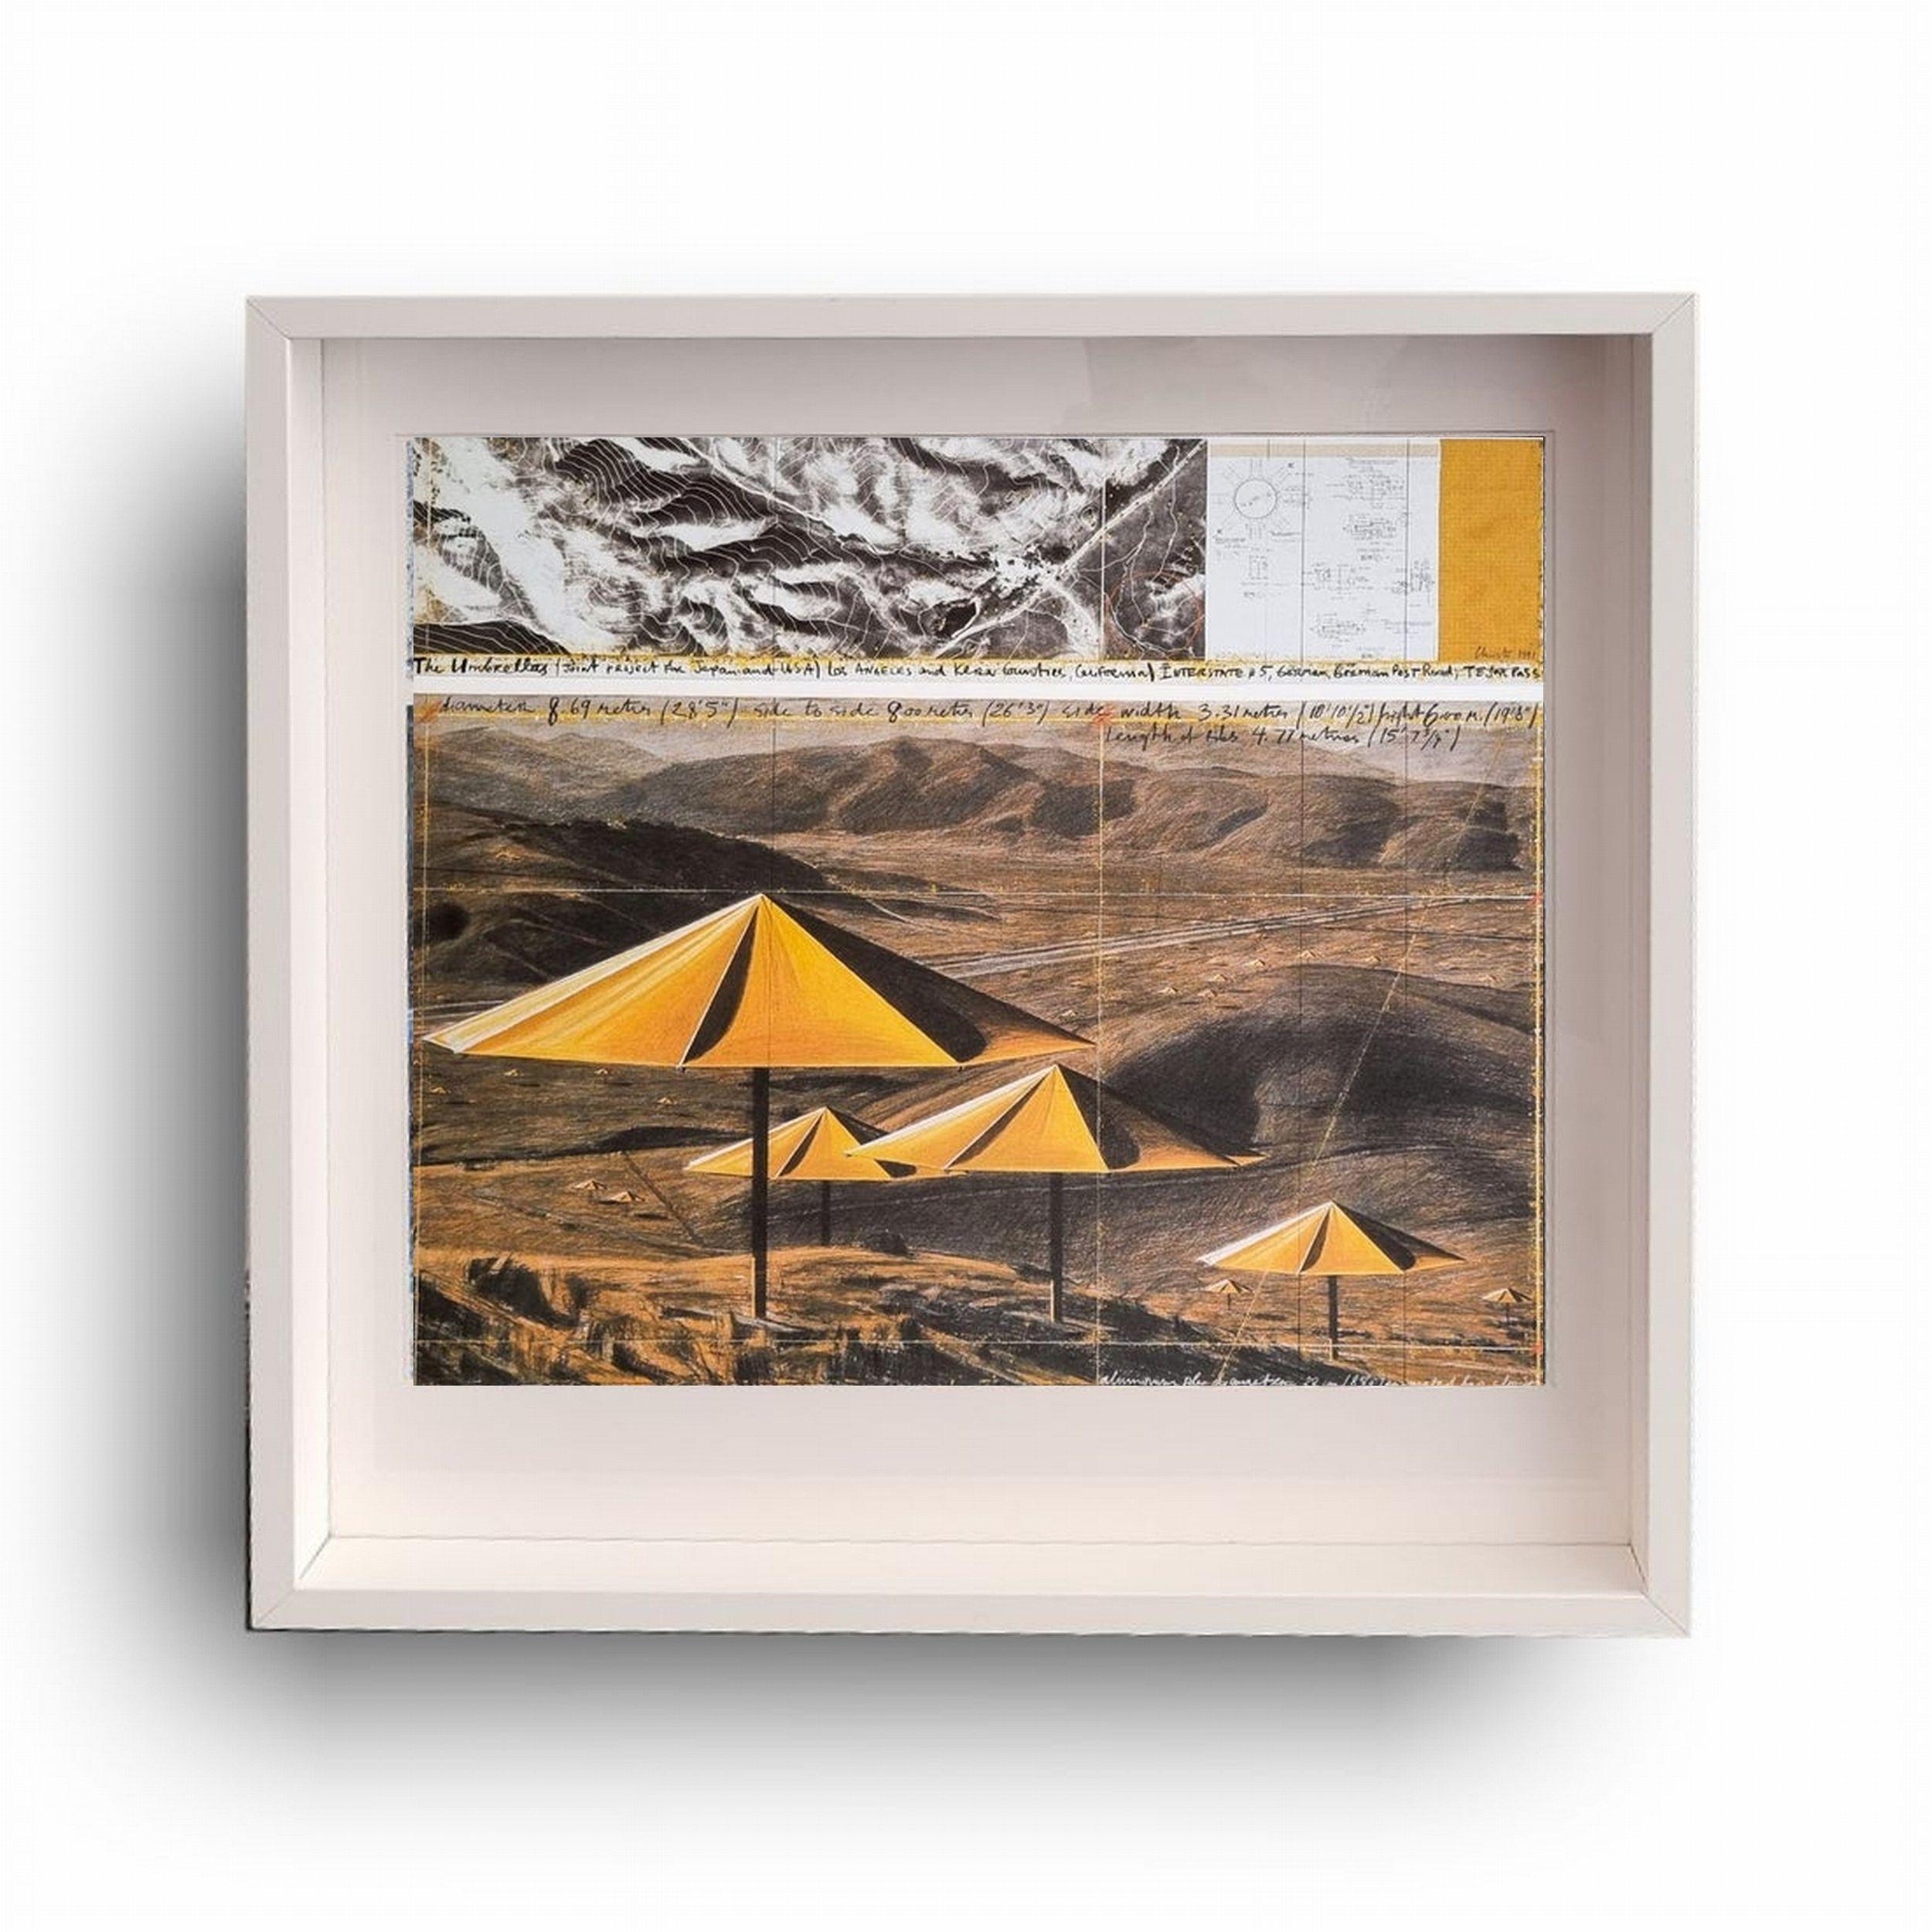 The Umbrellas (BOTH FRAMED - BLACK OR WHITE ... YOU CHOOSE + FREE U.S. SHIPPING) - Modern Print by Christo and Jeanne-Claude